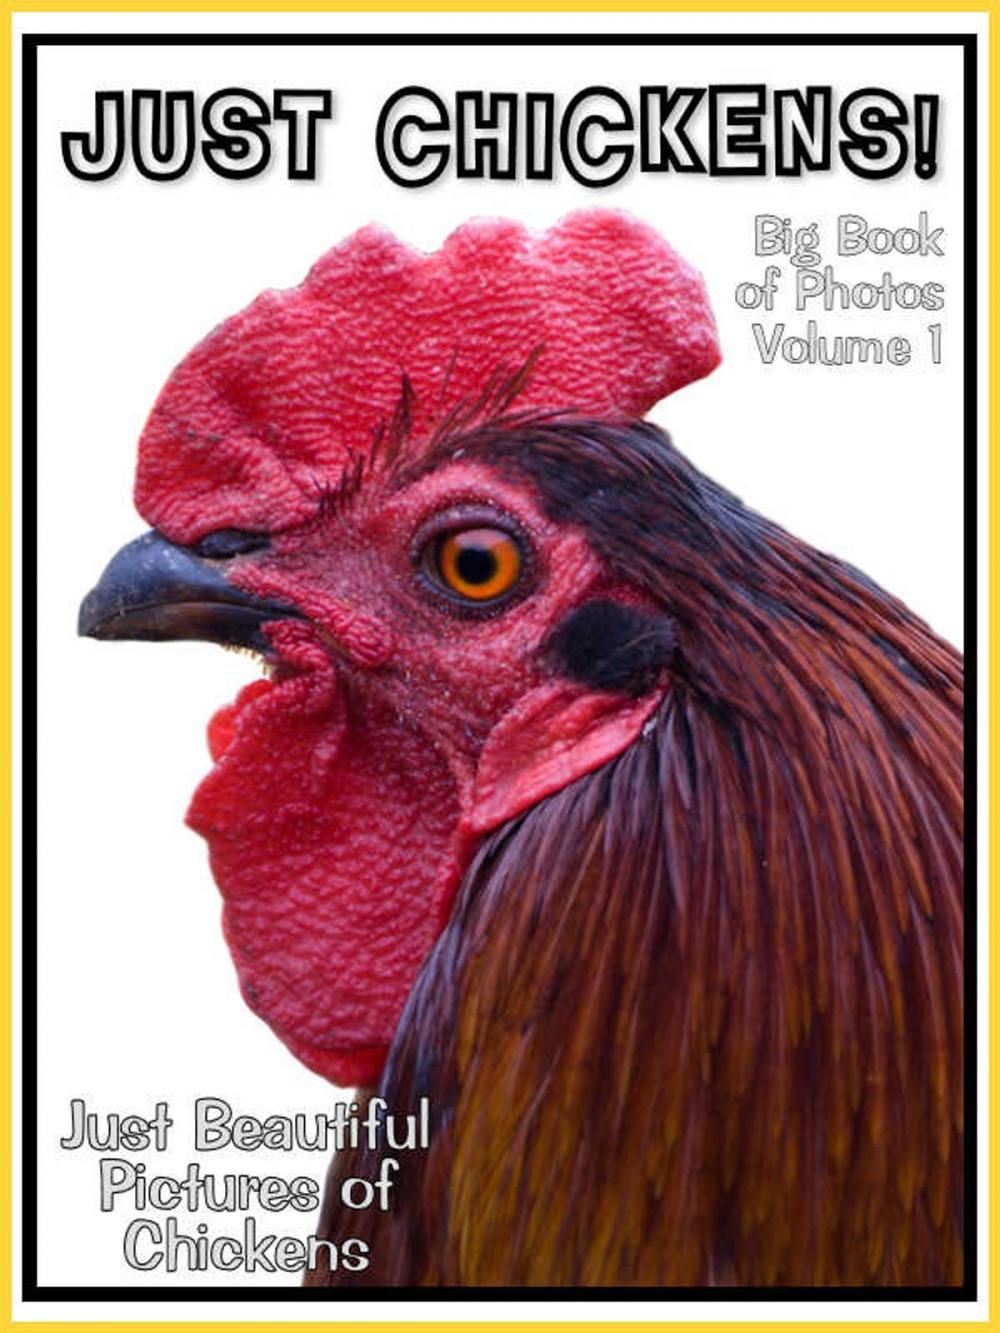 Big bigCover of Just Chicken Photos! Big Book of Photographs & Pictures of Chickens, Chicks, Hens, & Roosters, Vol. 1